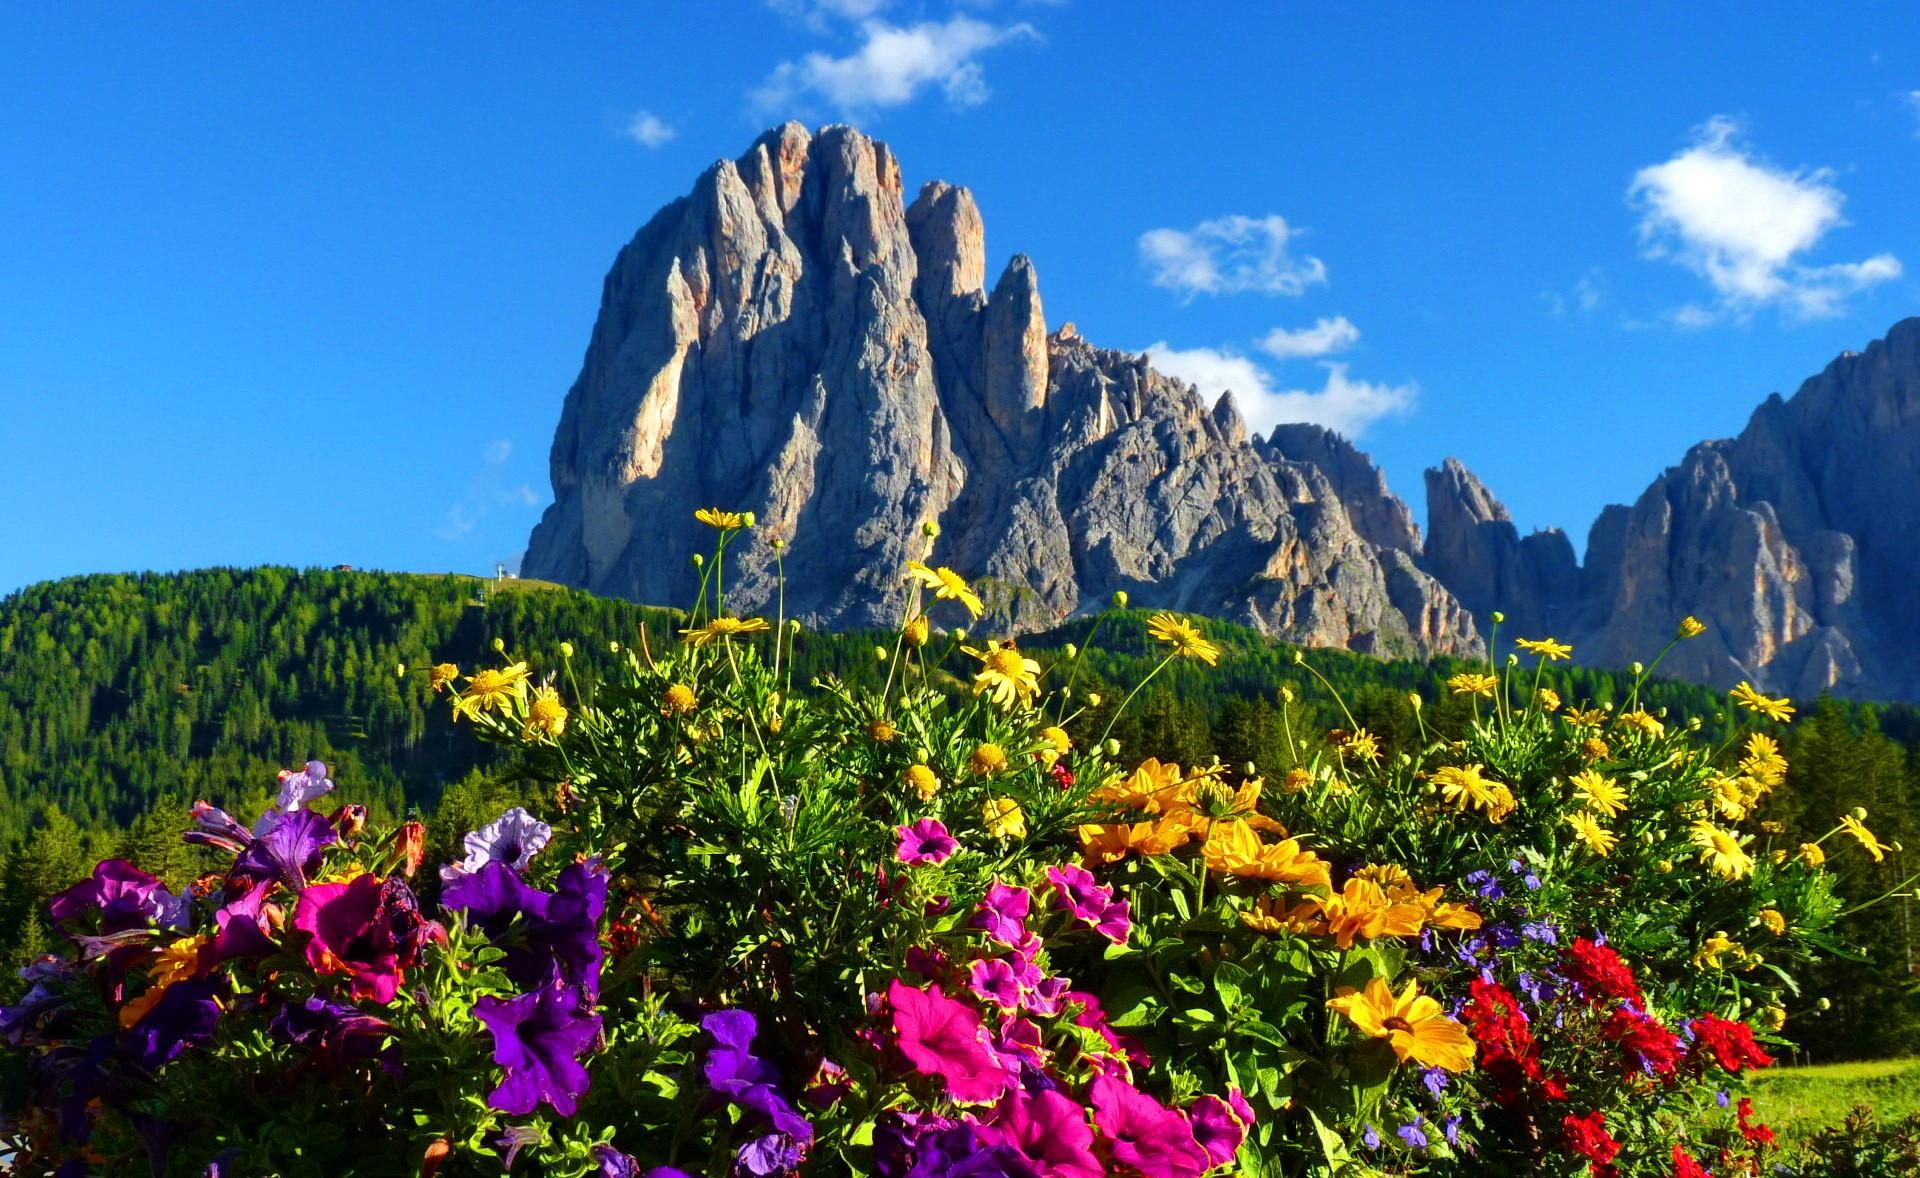 Mountains: Dolomites Italy Colorful Grass Mountain Rocks Flowers